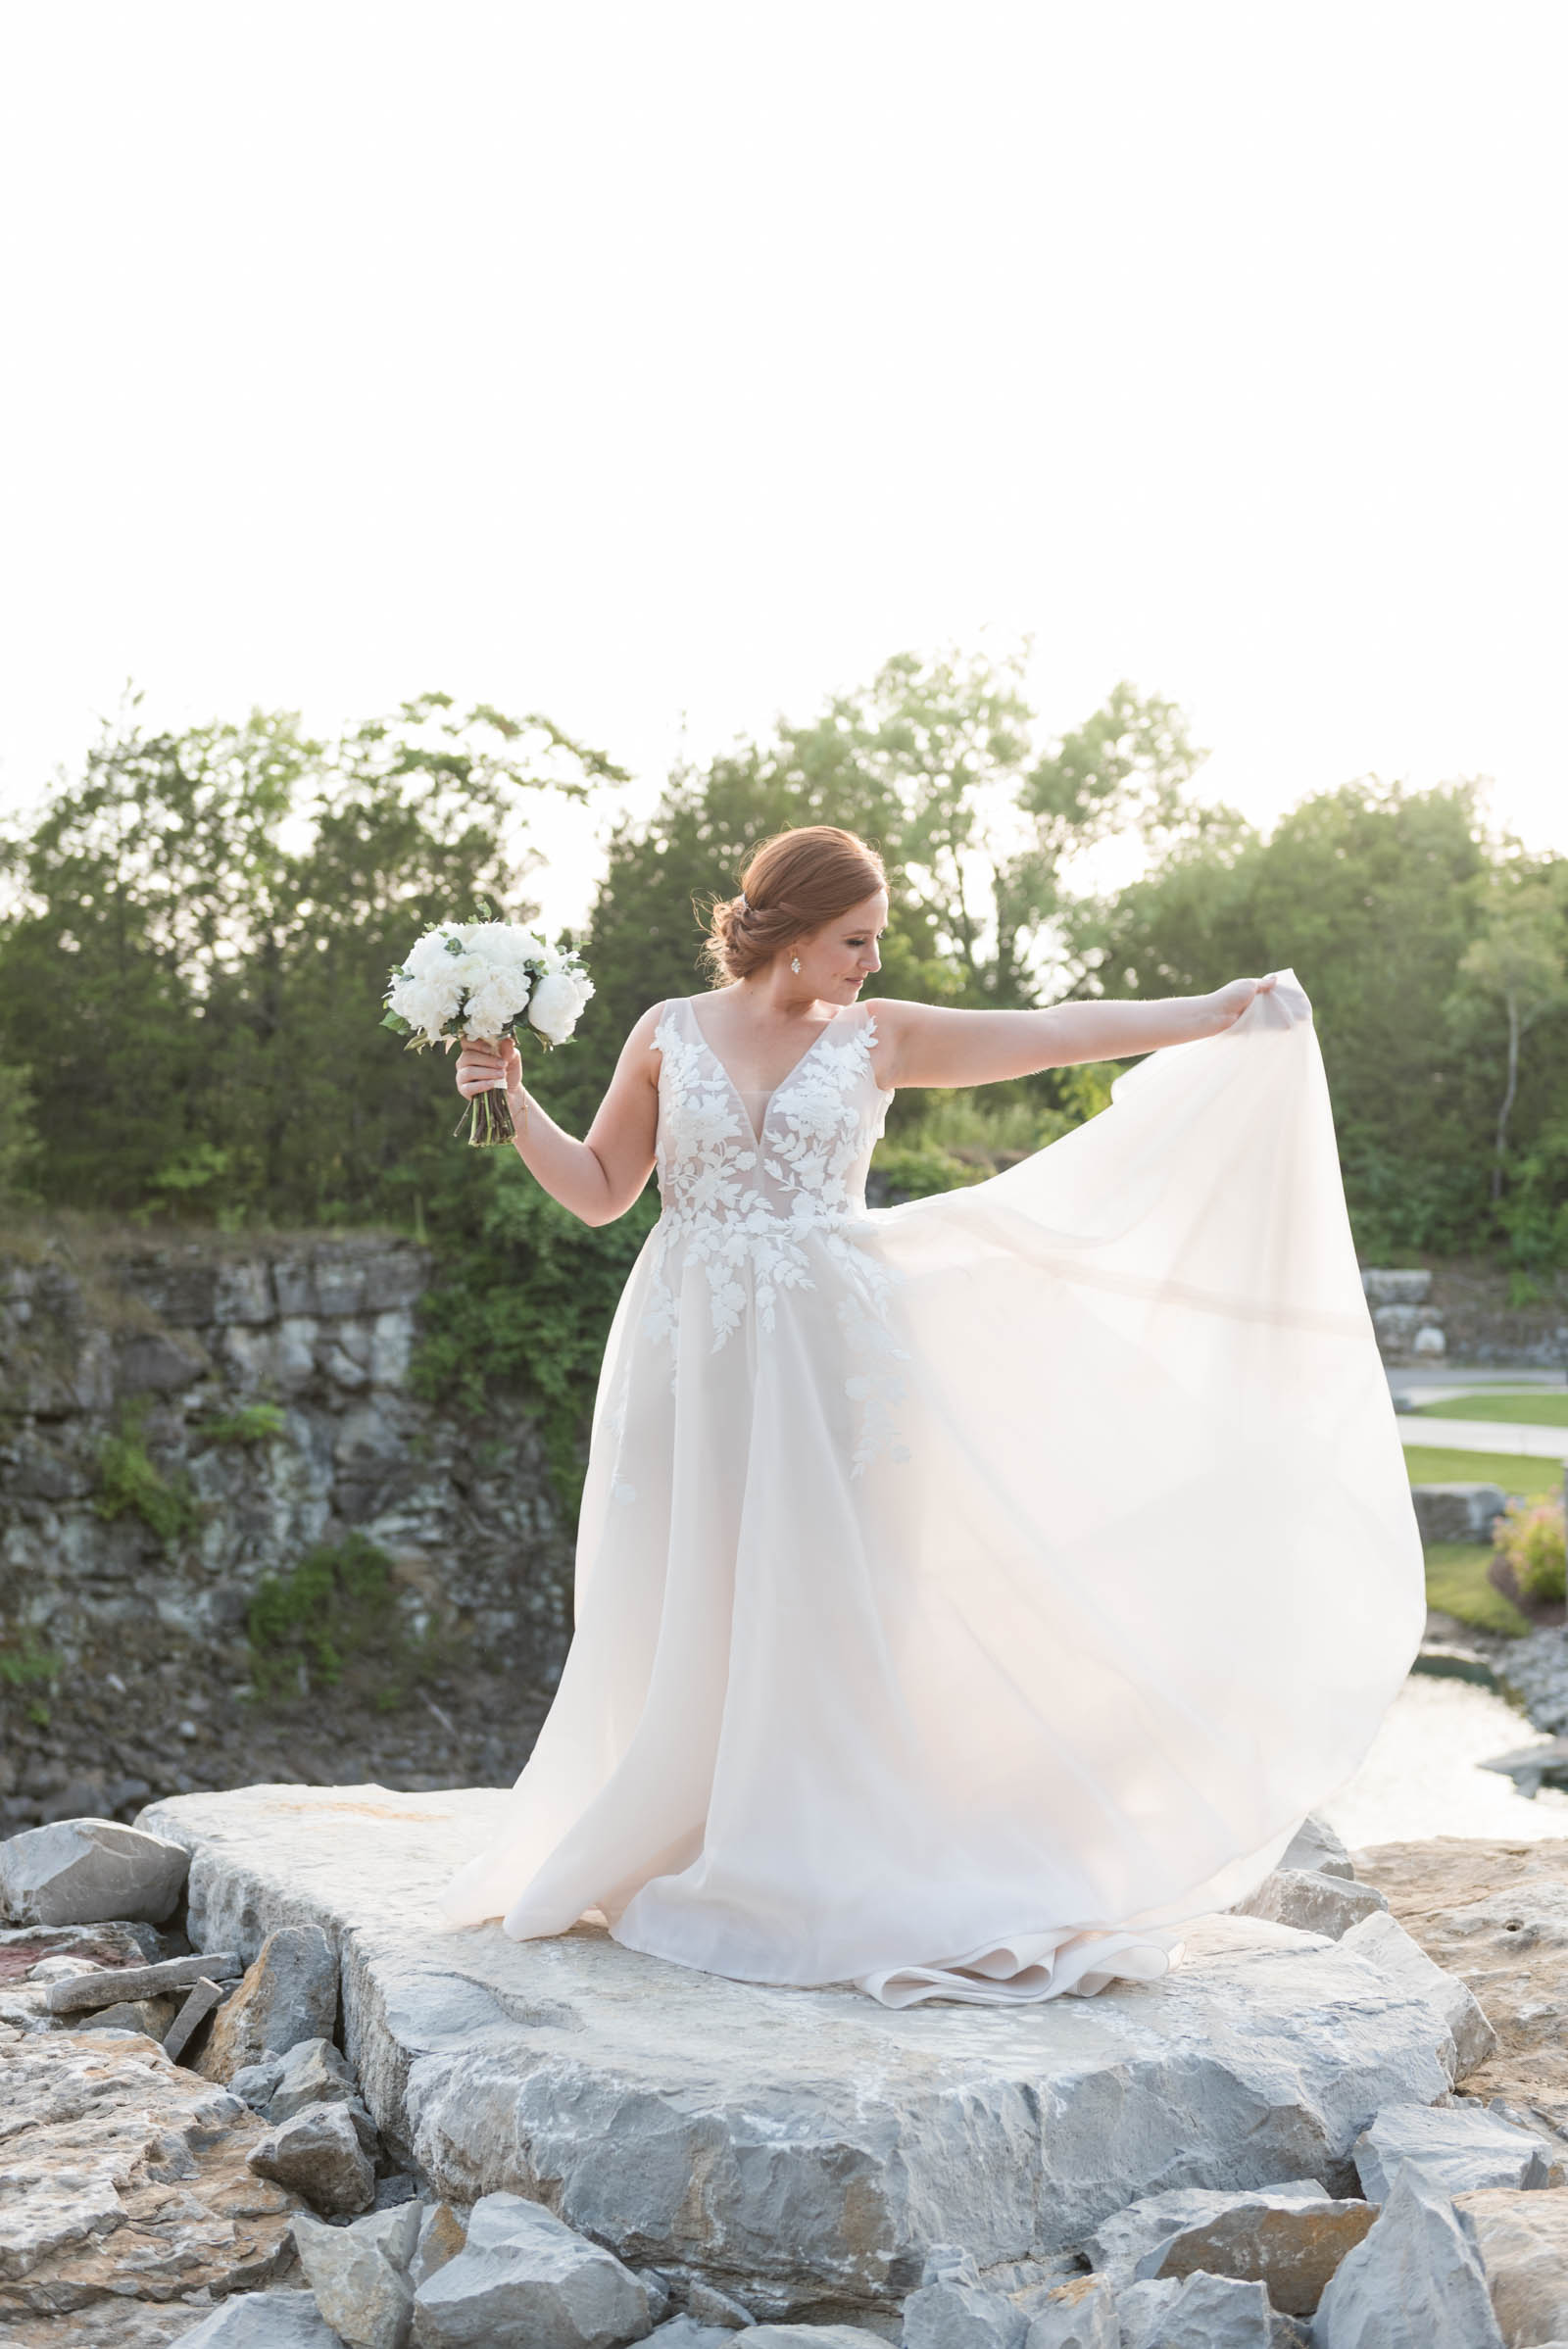 Wedding at Graystone Quarry Franklin, Tennessee Sweet Williams Photography Wedding Photographer